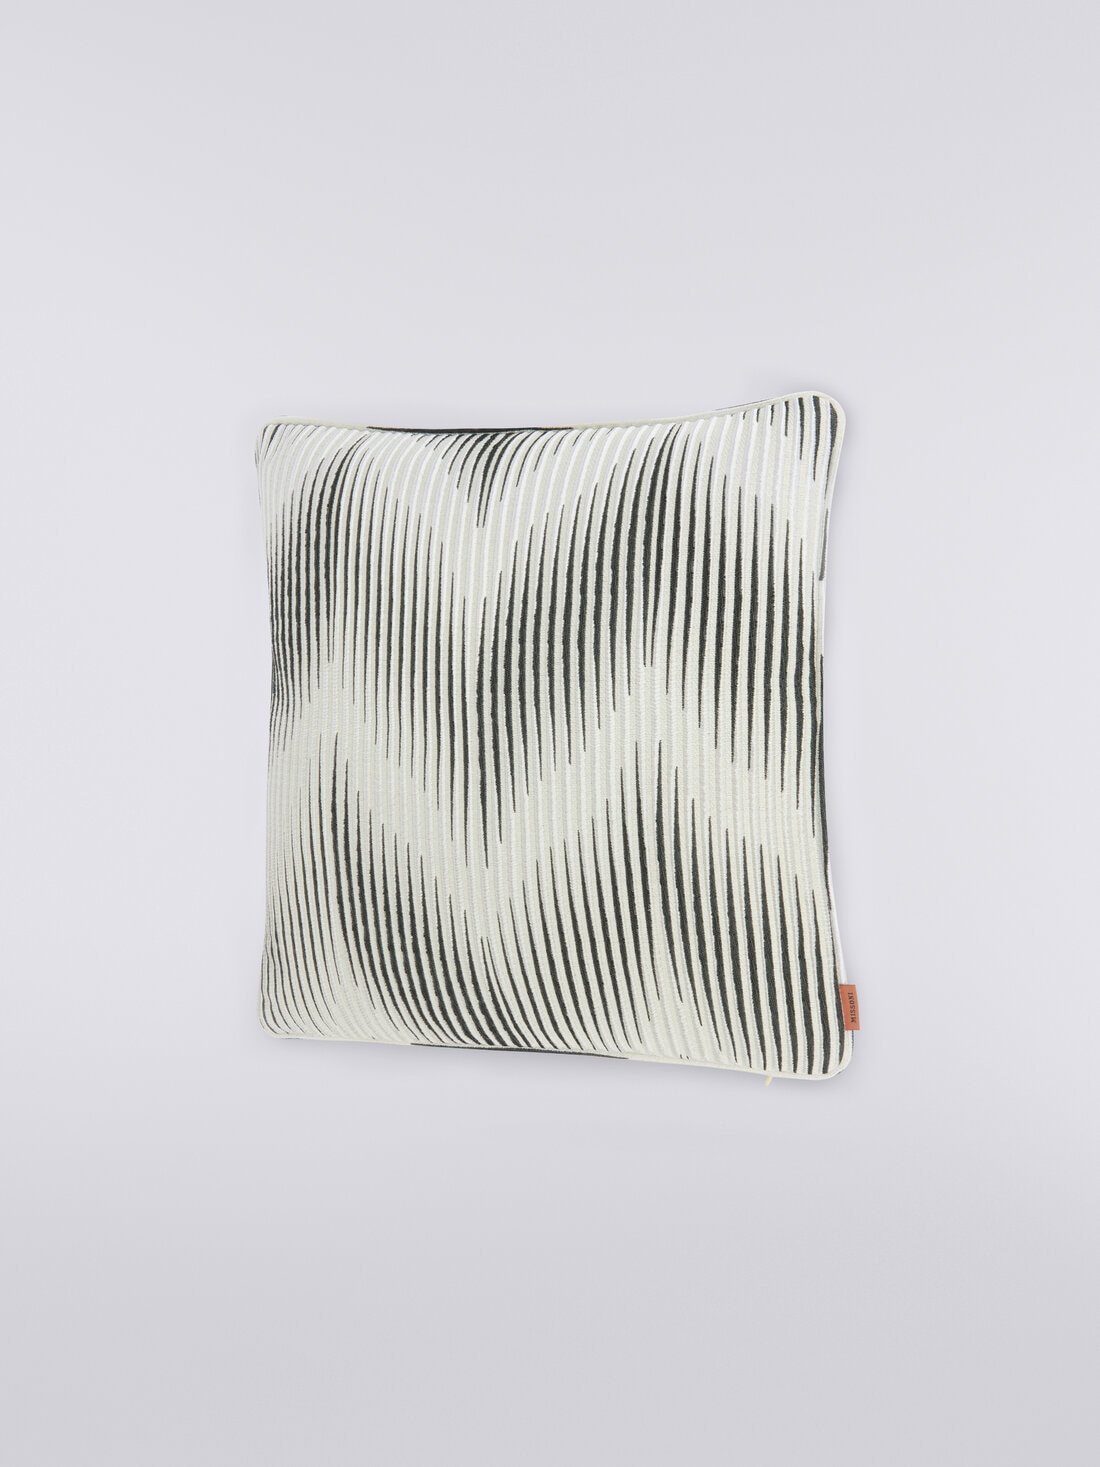 Ande 40x40 cm cushion with faded chevron, Black & White - 8051575829567 - 1